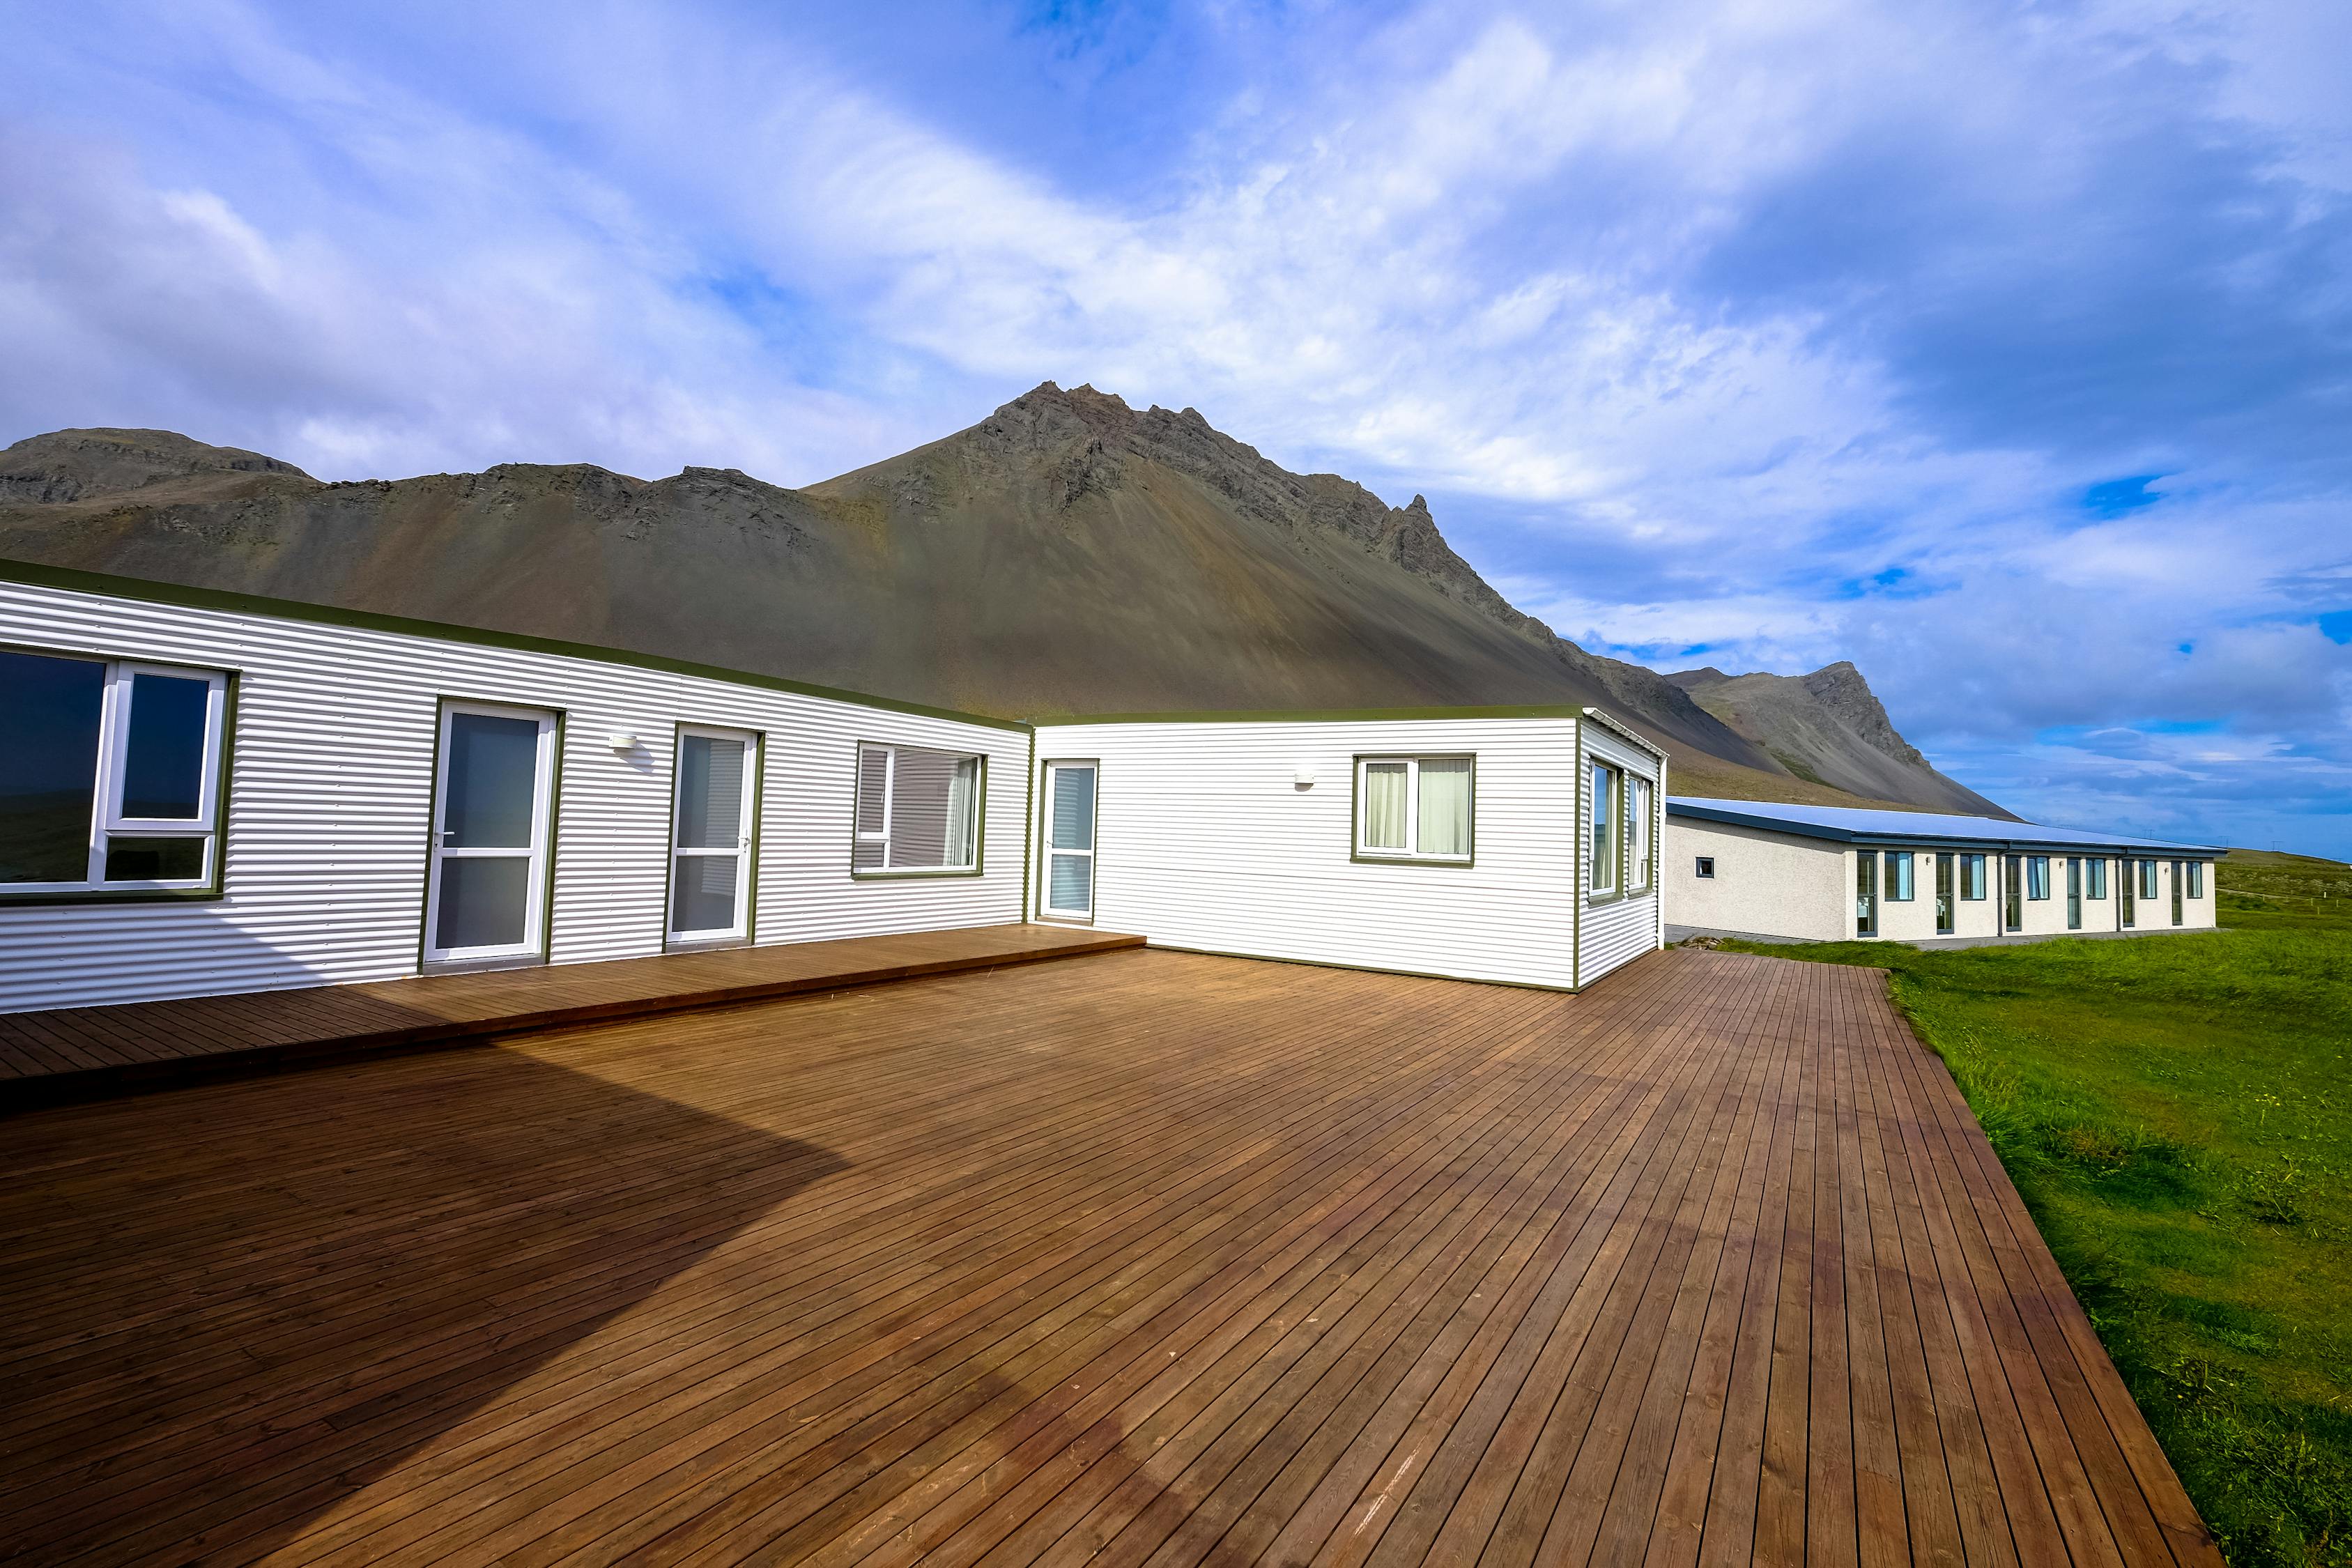 A white vinyl sided house attached to a beautifully restored wooden deck near a mountain and grass field